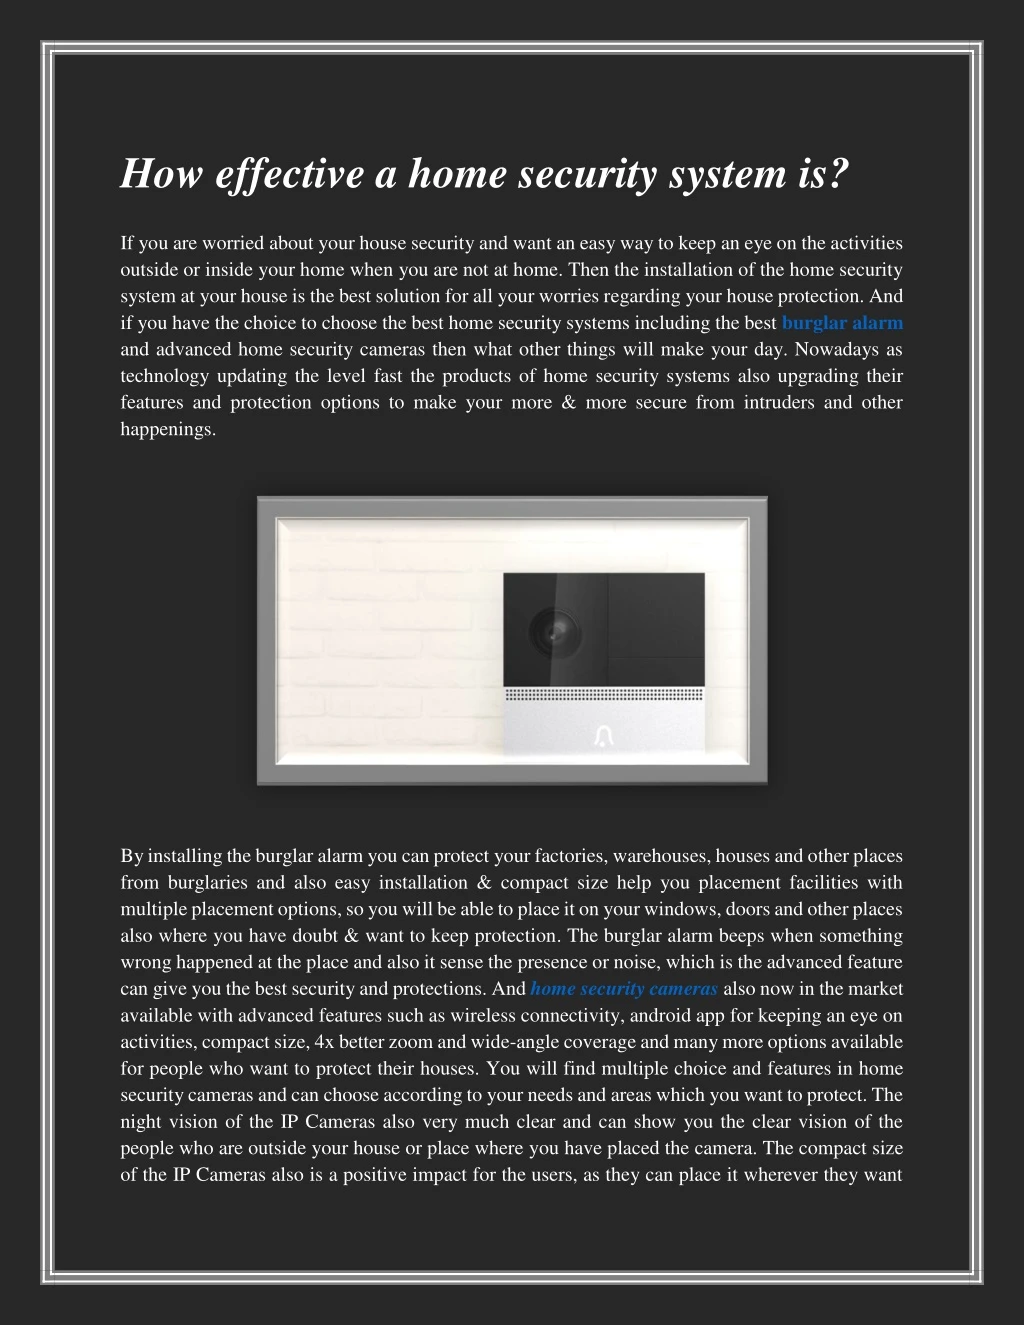 how effective a home security system